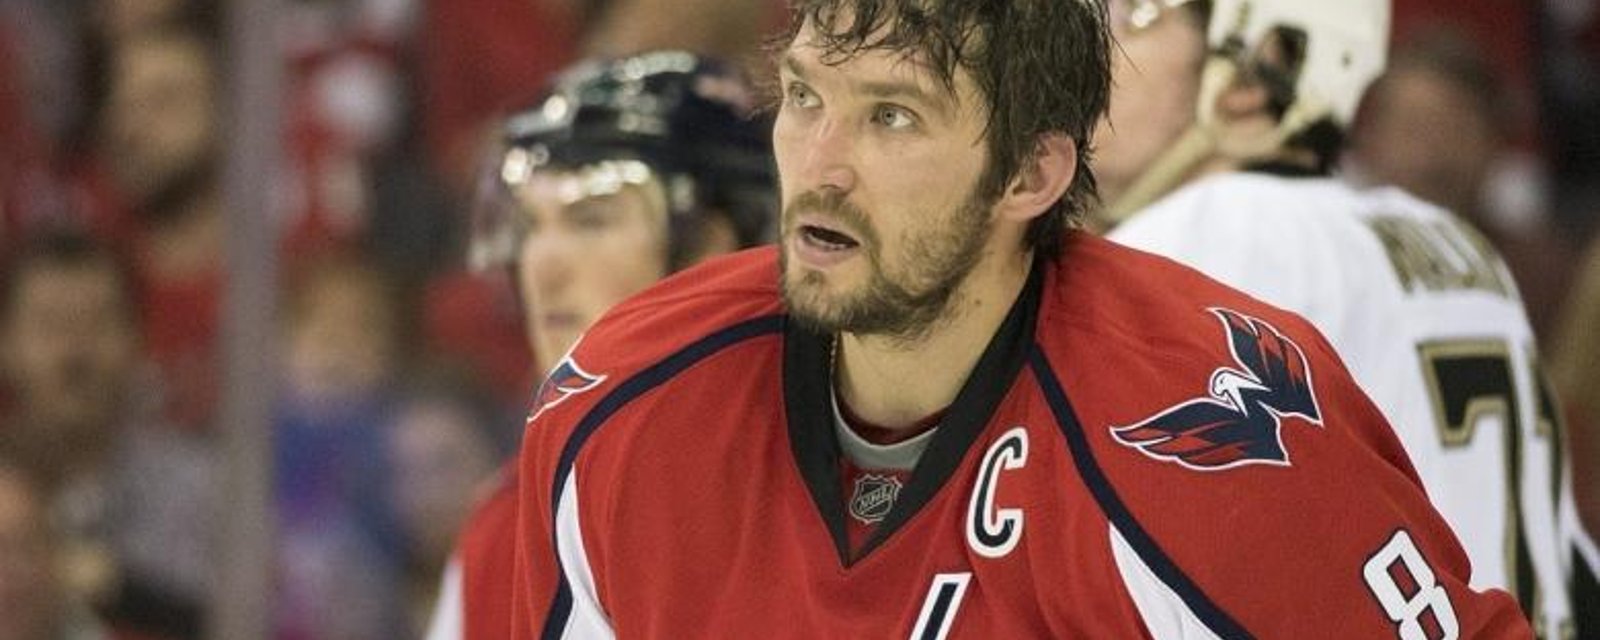 Alex Ovechkin following in Pavel Datsyuk's footsteps?